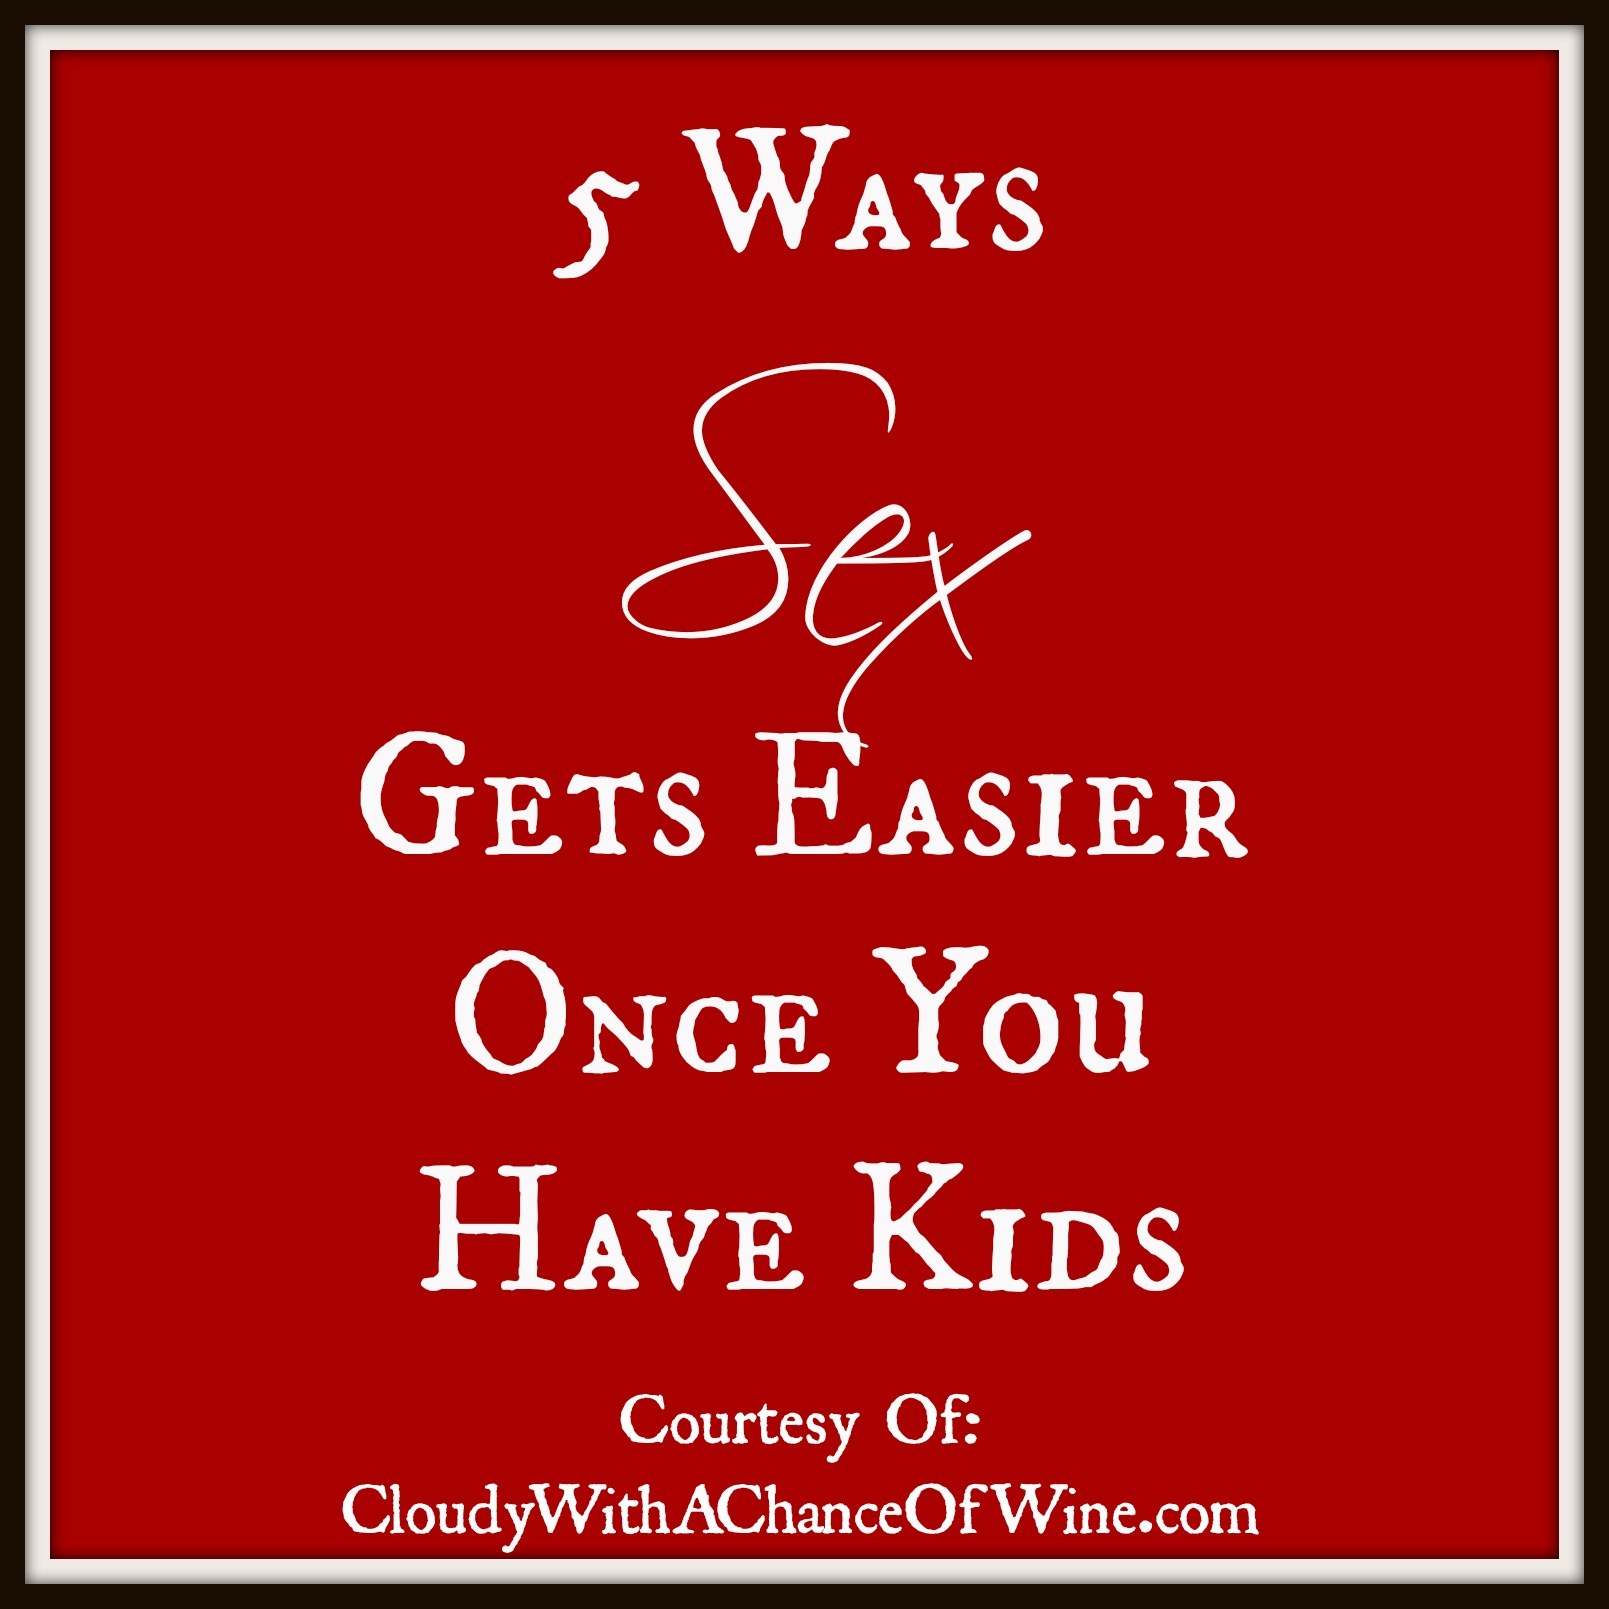 5 Ways Sex Gets Easier Once You Have Kids by Cloudy with a Chance of Wine